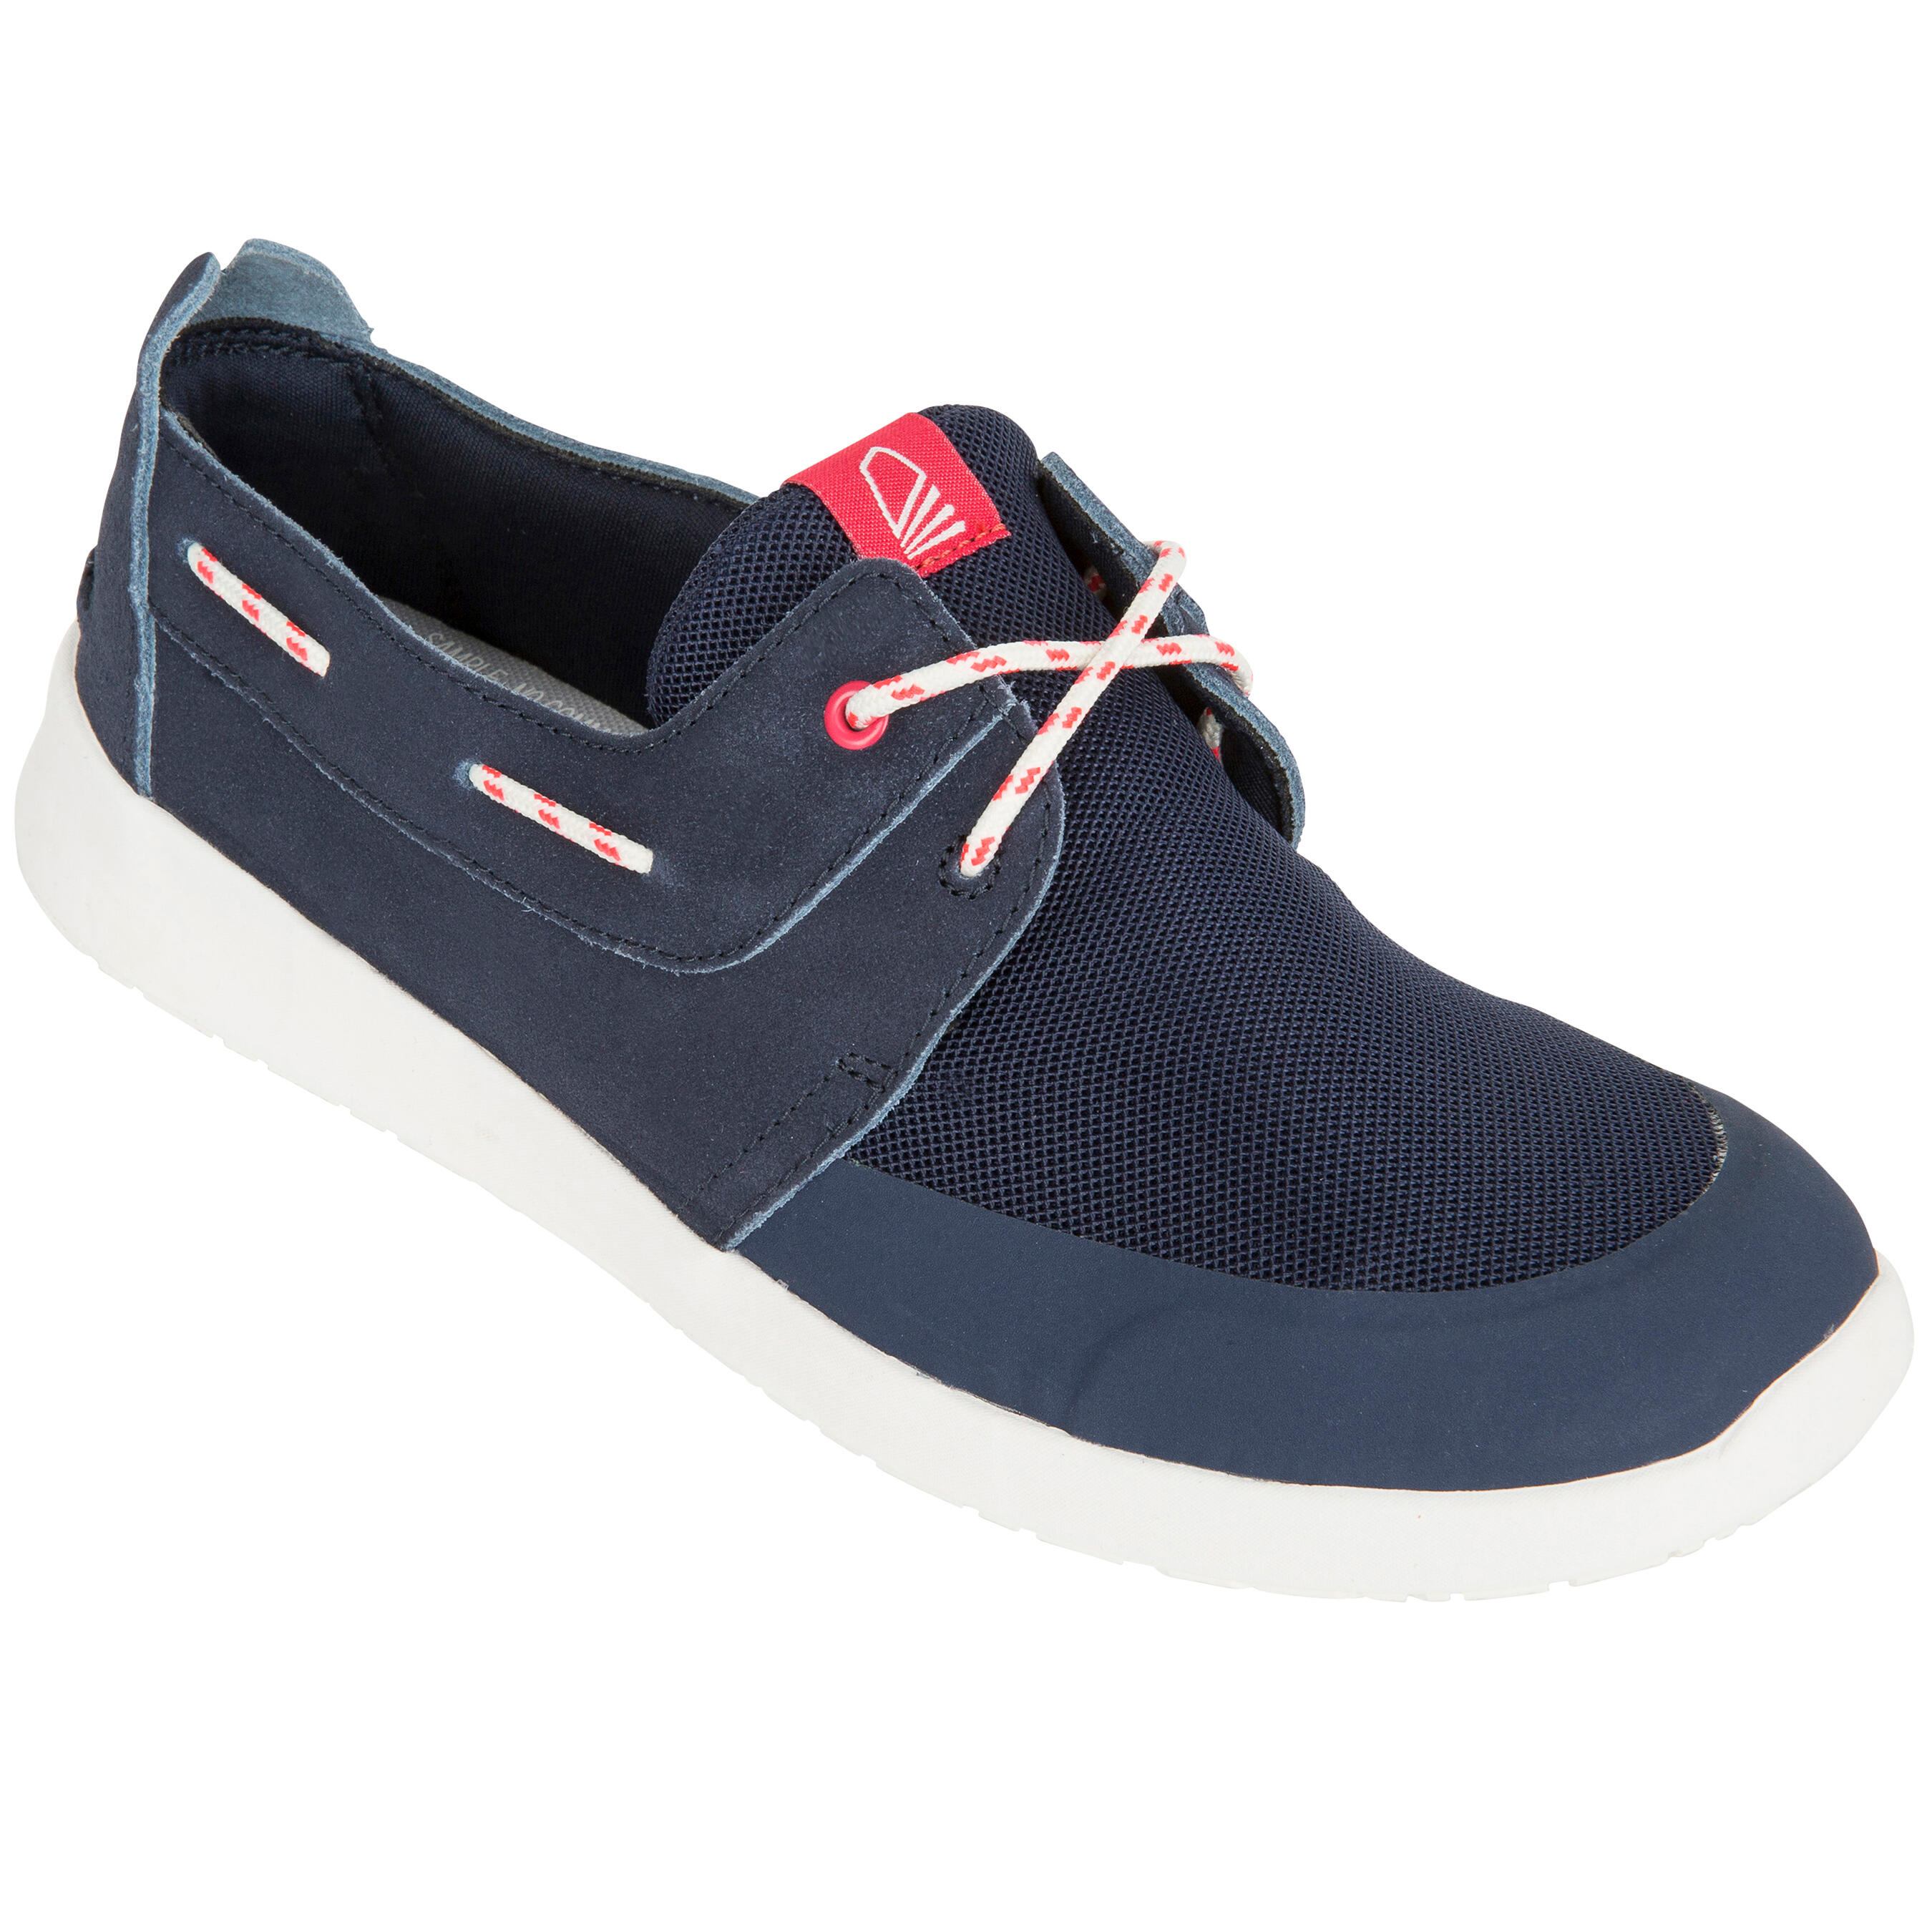 Cruise 100 Women's Leather Boat Shoes Dark Blue 1/8